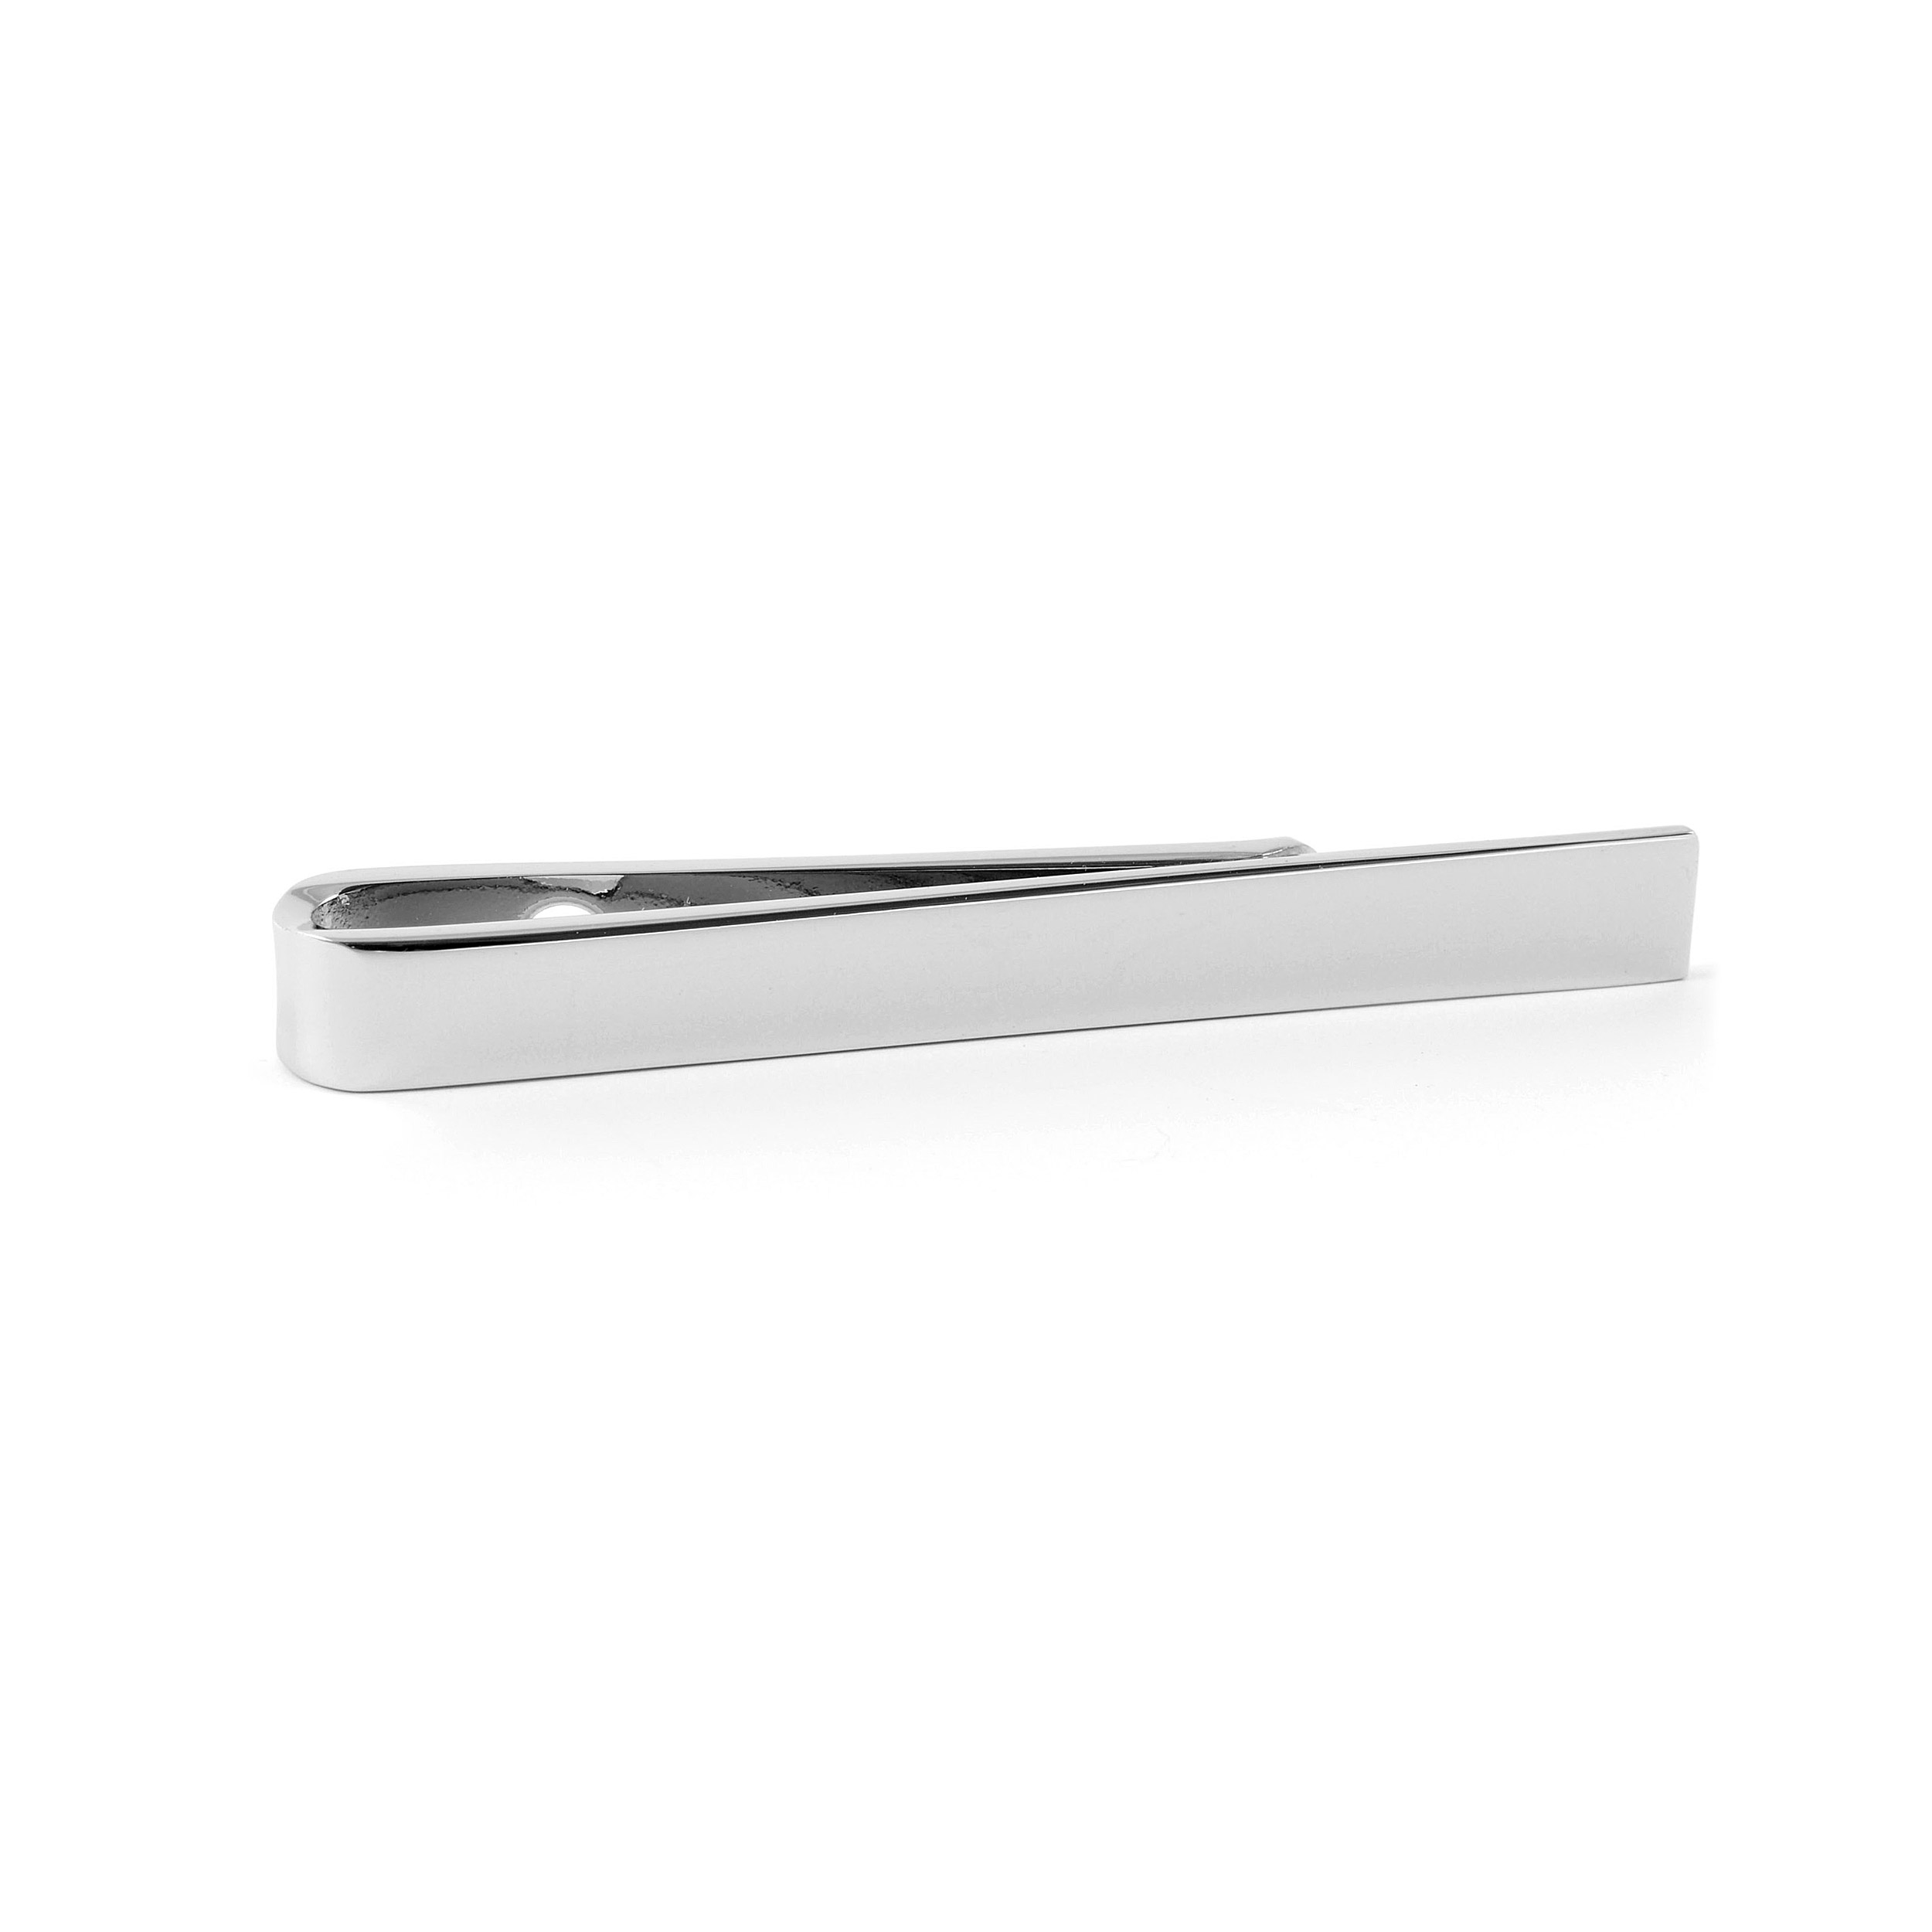 J.Crew Men's Sterling Silver Spring-Loaded Tie Bar (Size One Size)